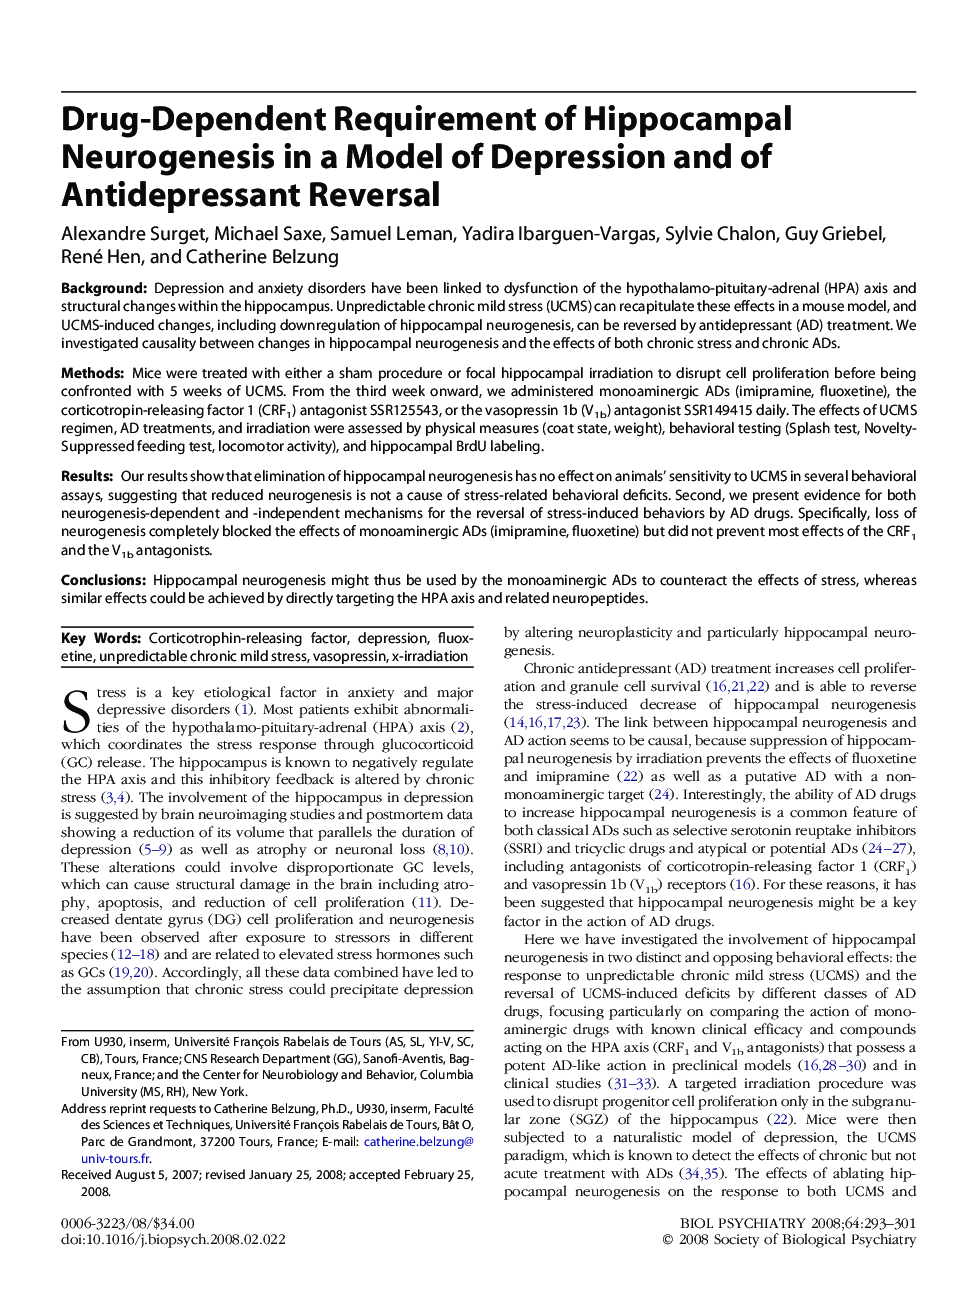 Drug-Dependent Requirement of Hippocampal Neurogenesis in a Model of Depression and of Antidepressant Reversal